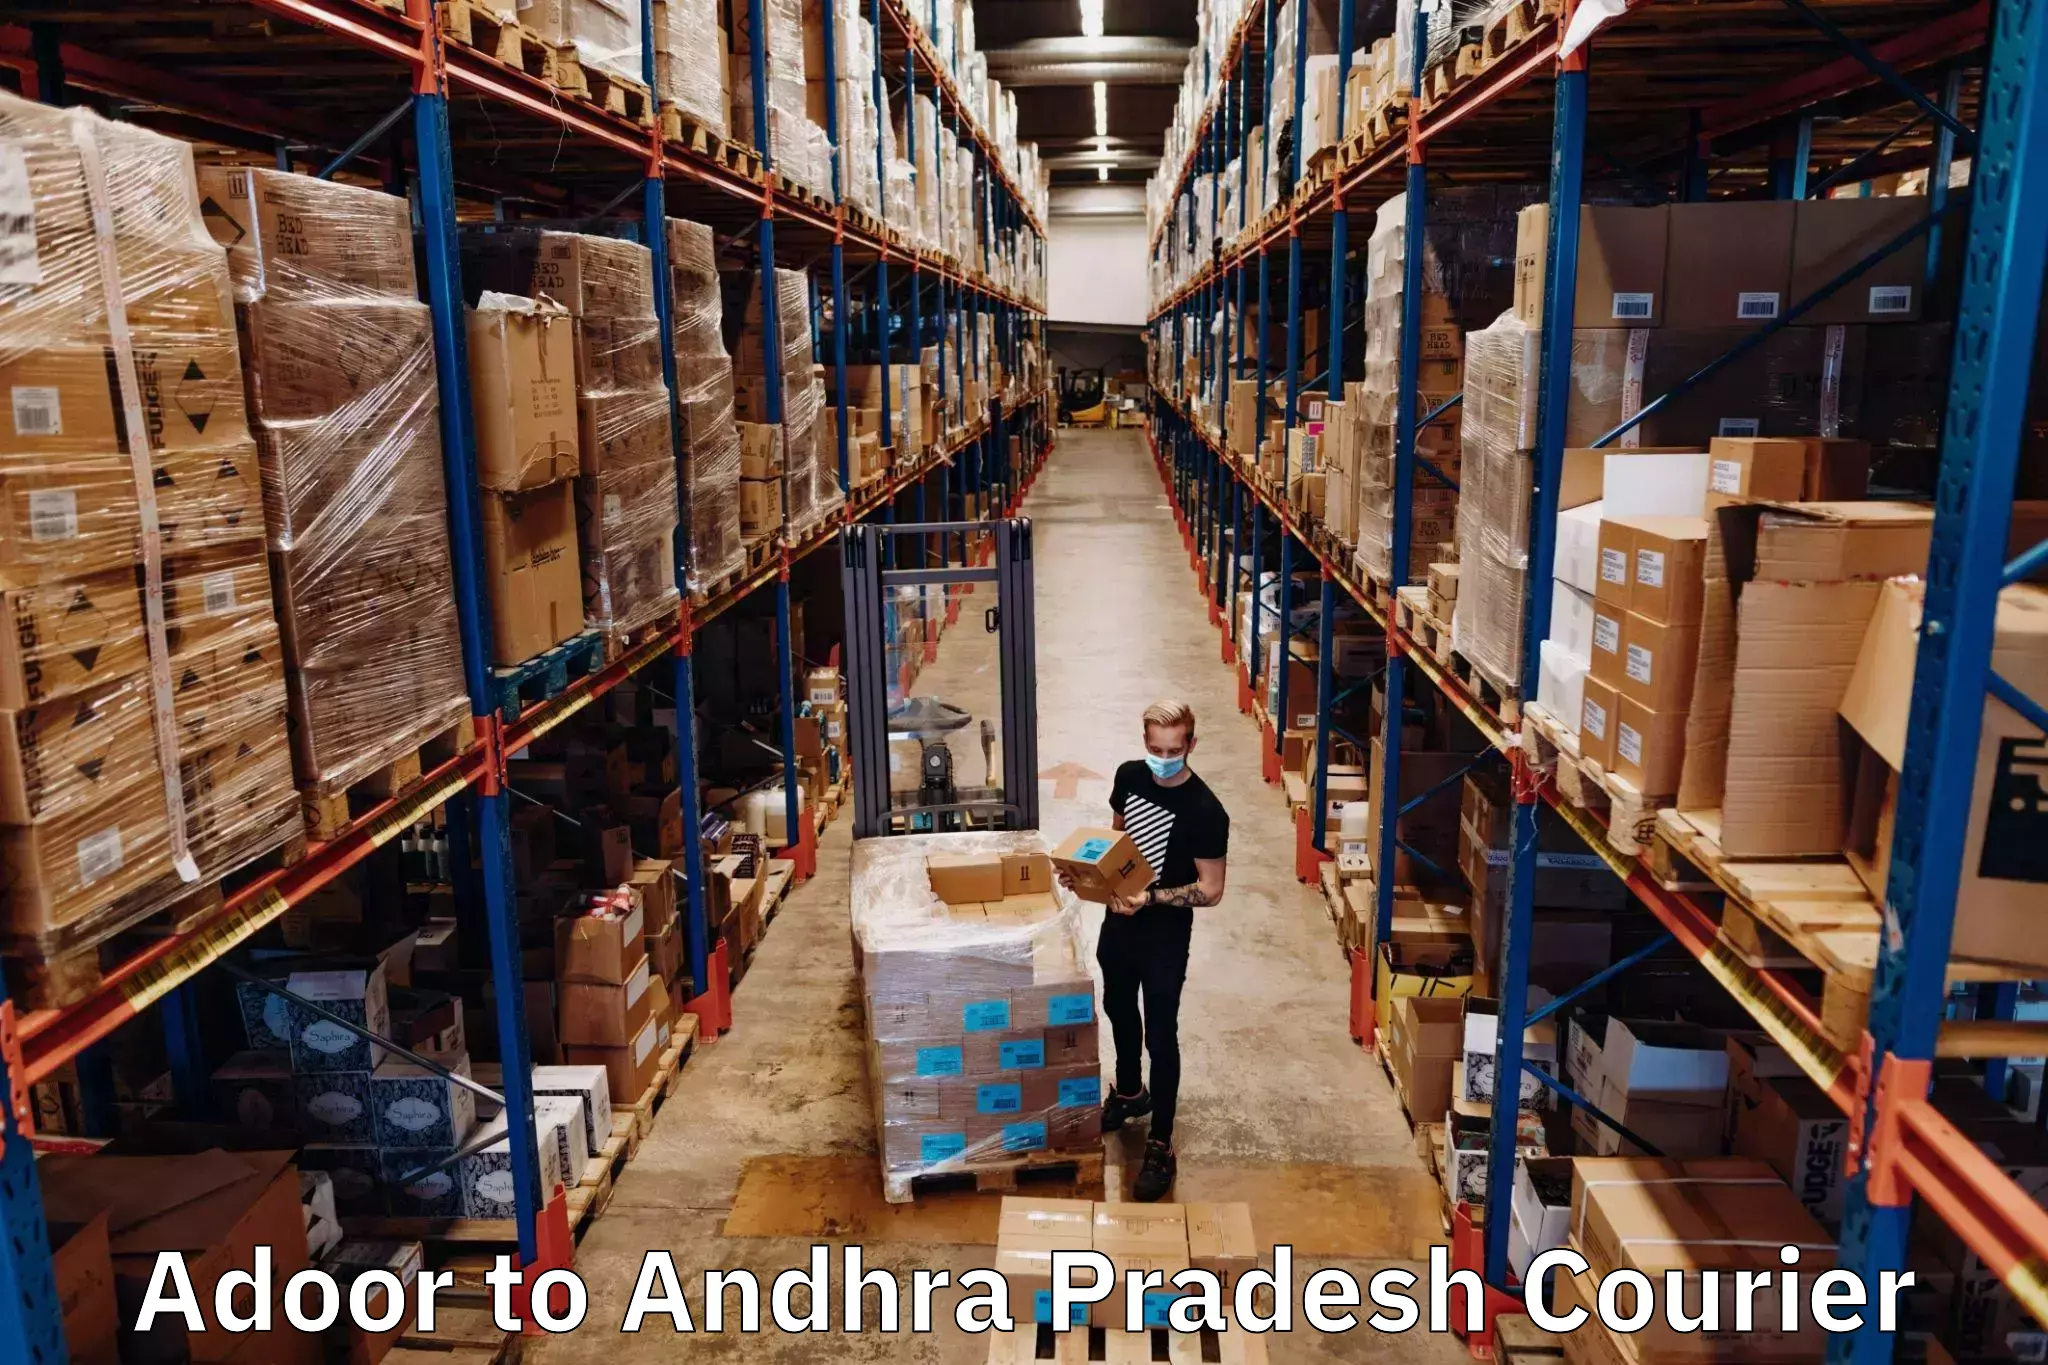 Sustainable shipping practices Adoor to Andhra Pradesh